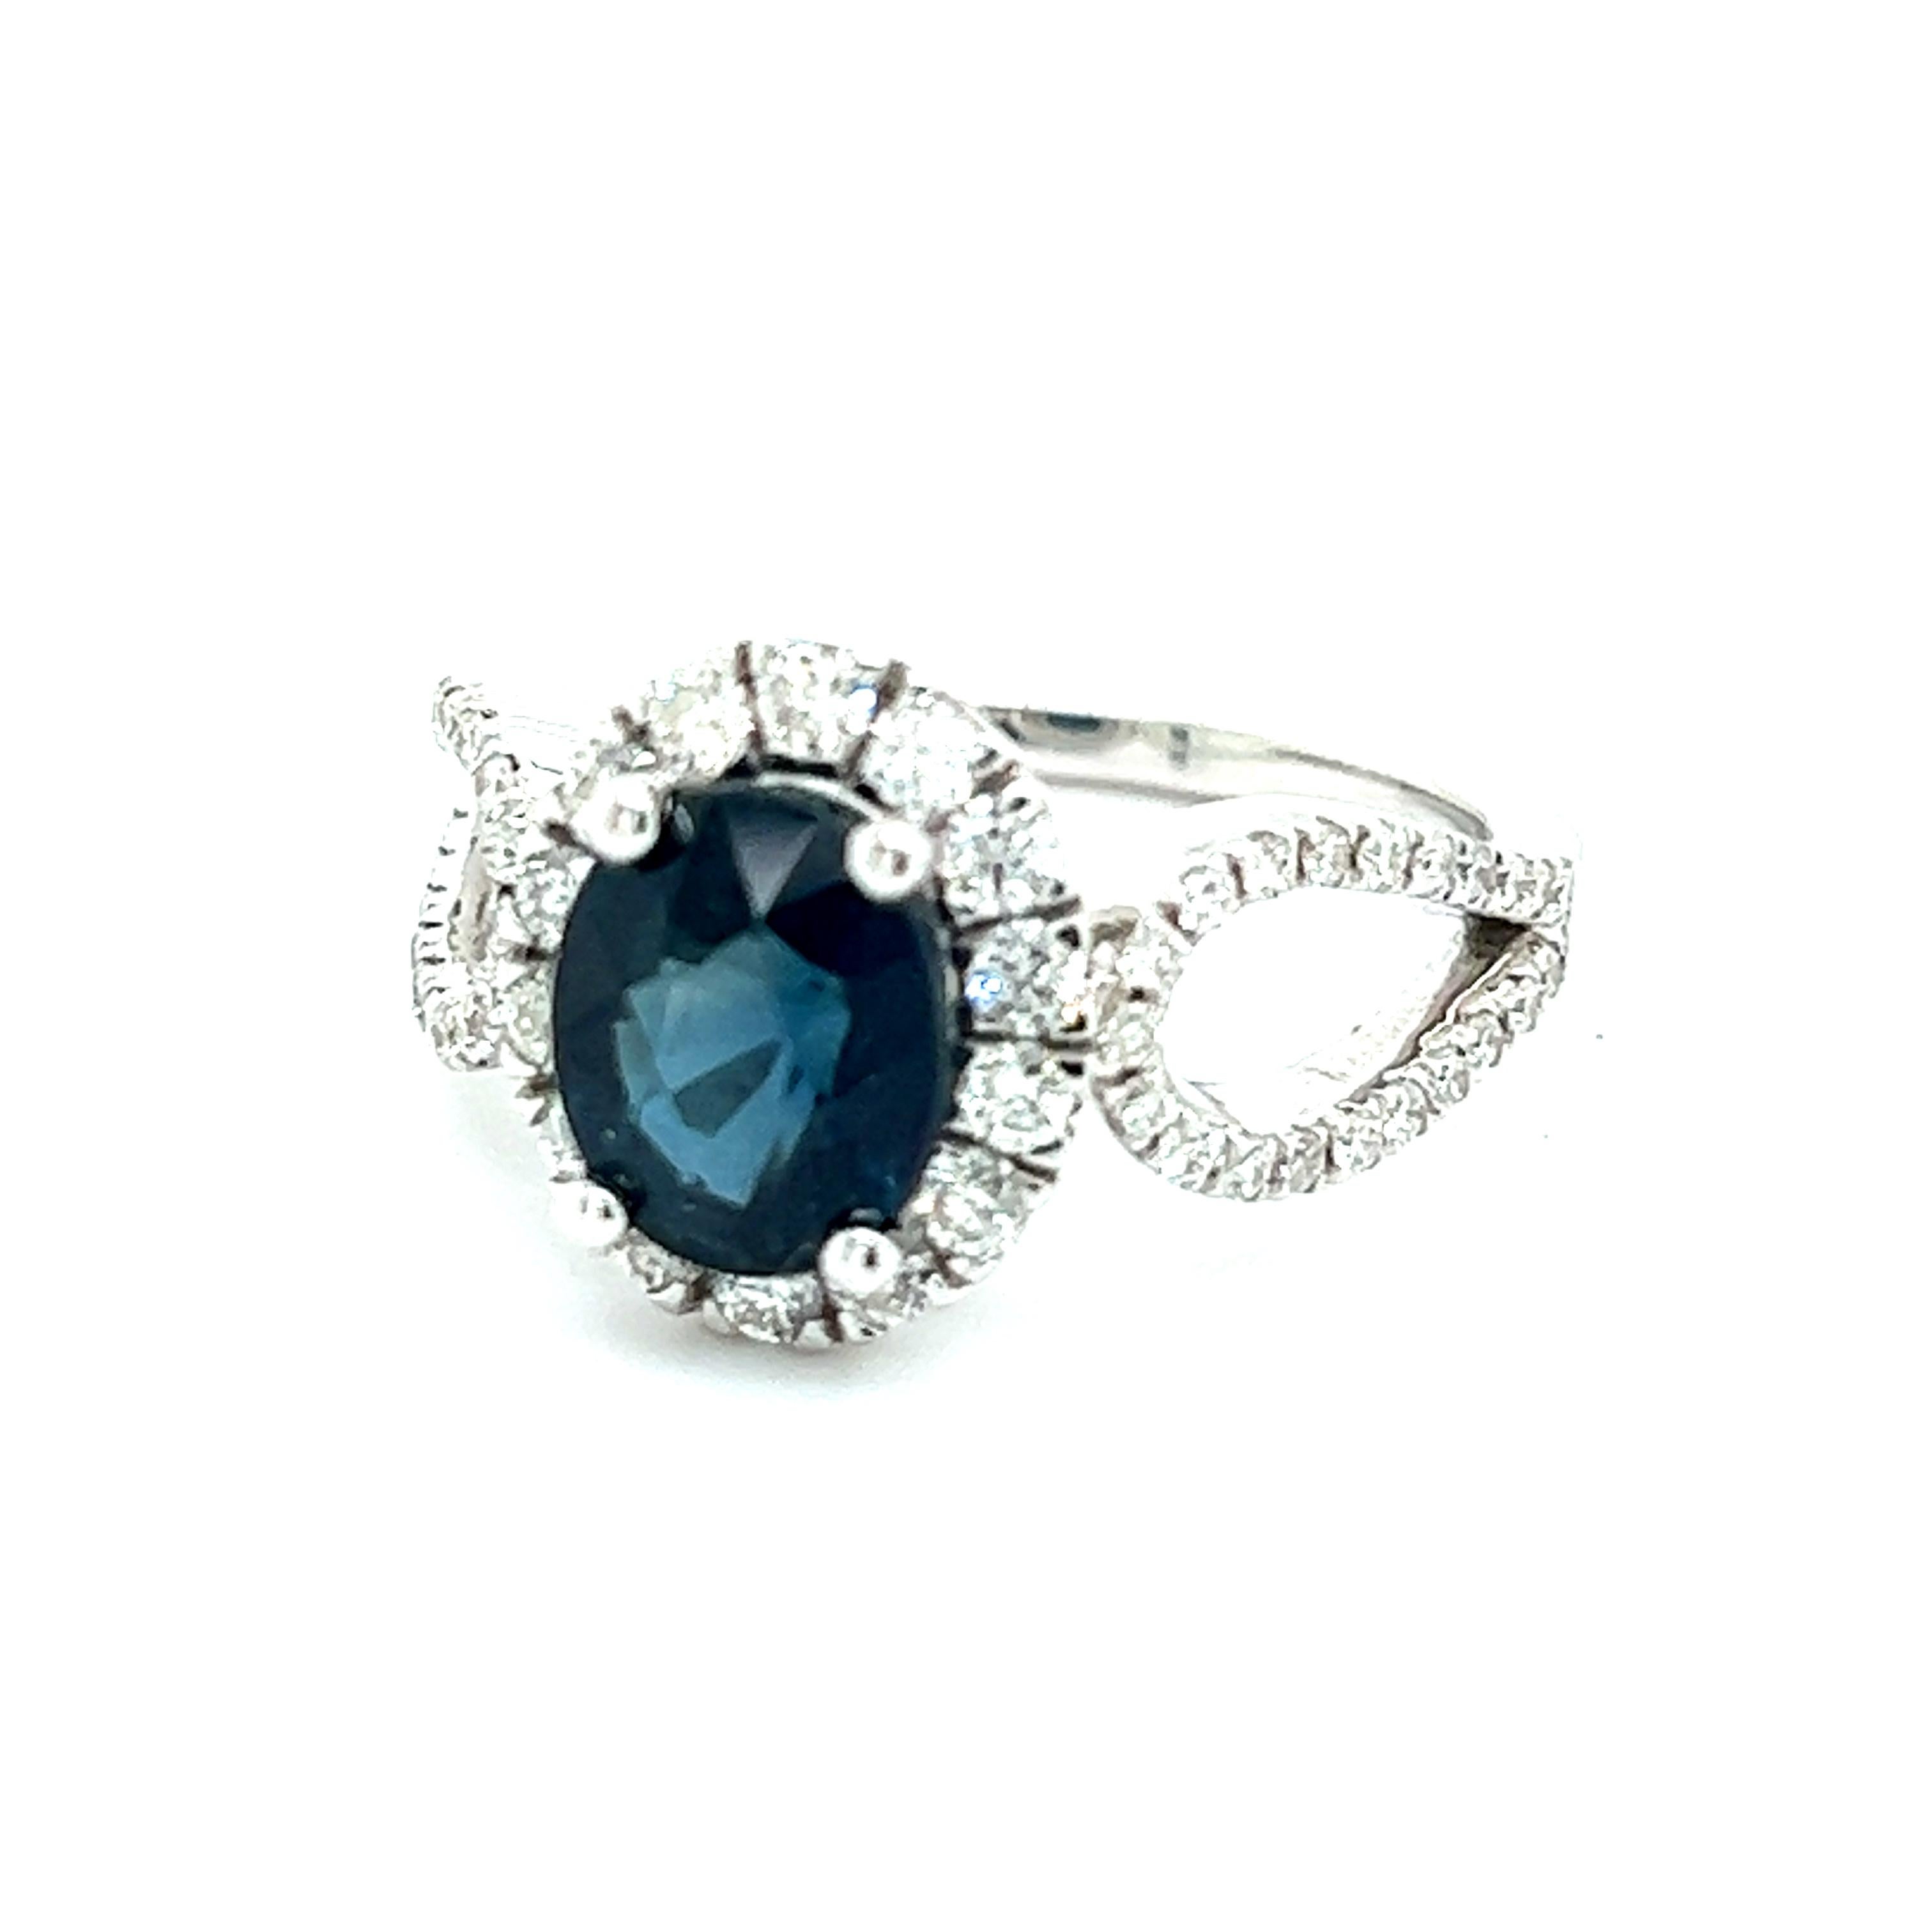 Natural Sapphire Diamond Ring Size 6.25 14k W Gold 2.93 TCW Certified For Sale 2